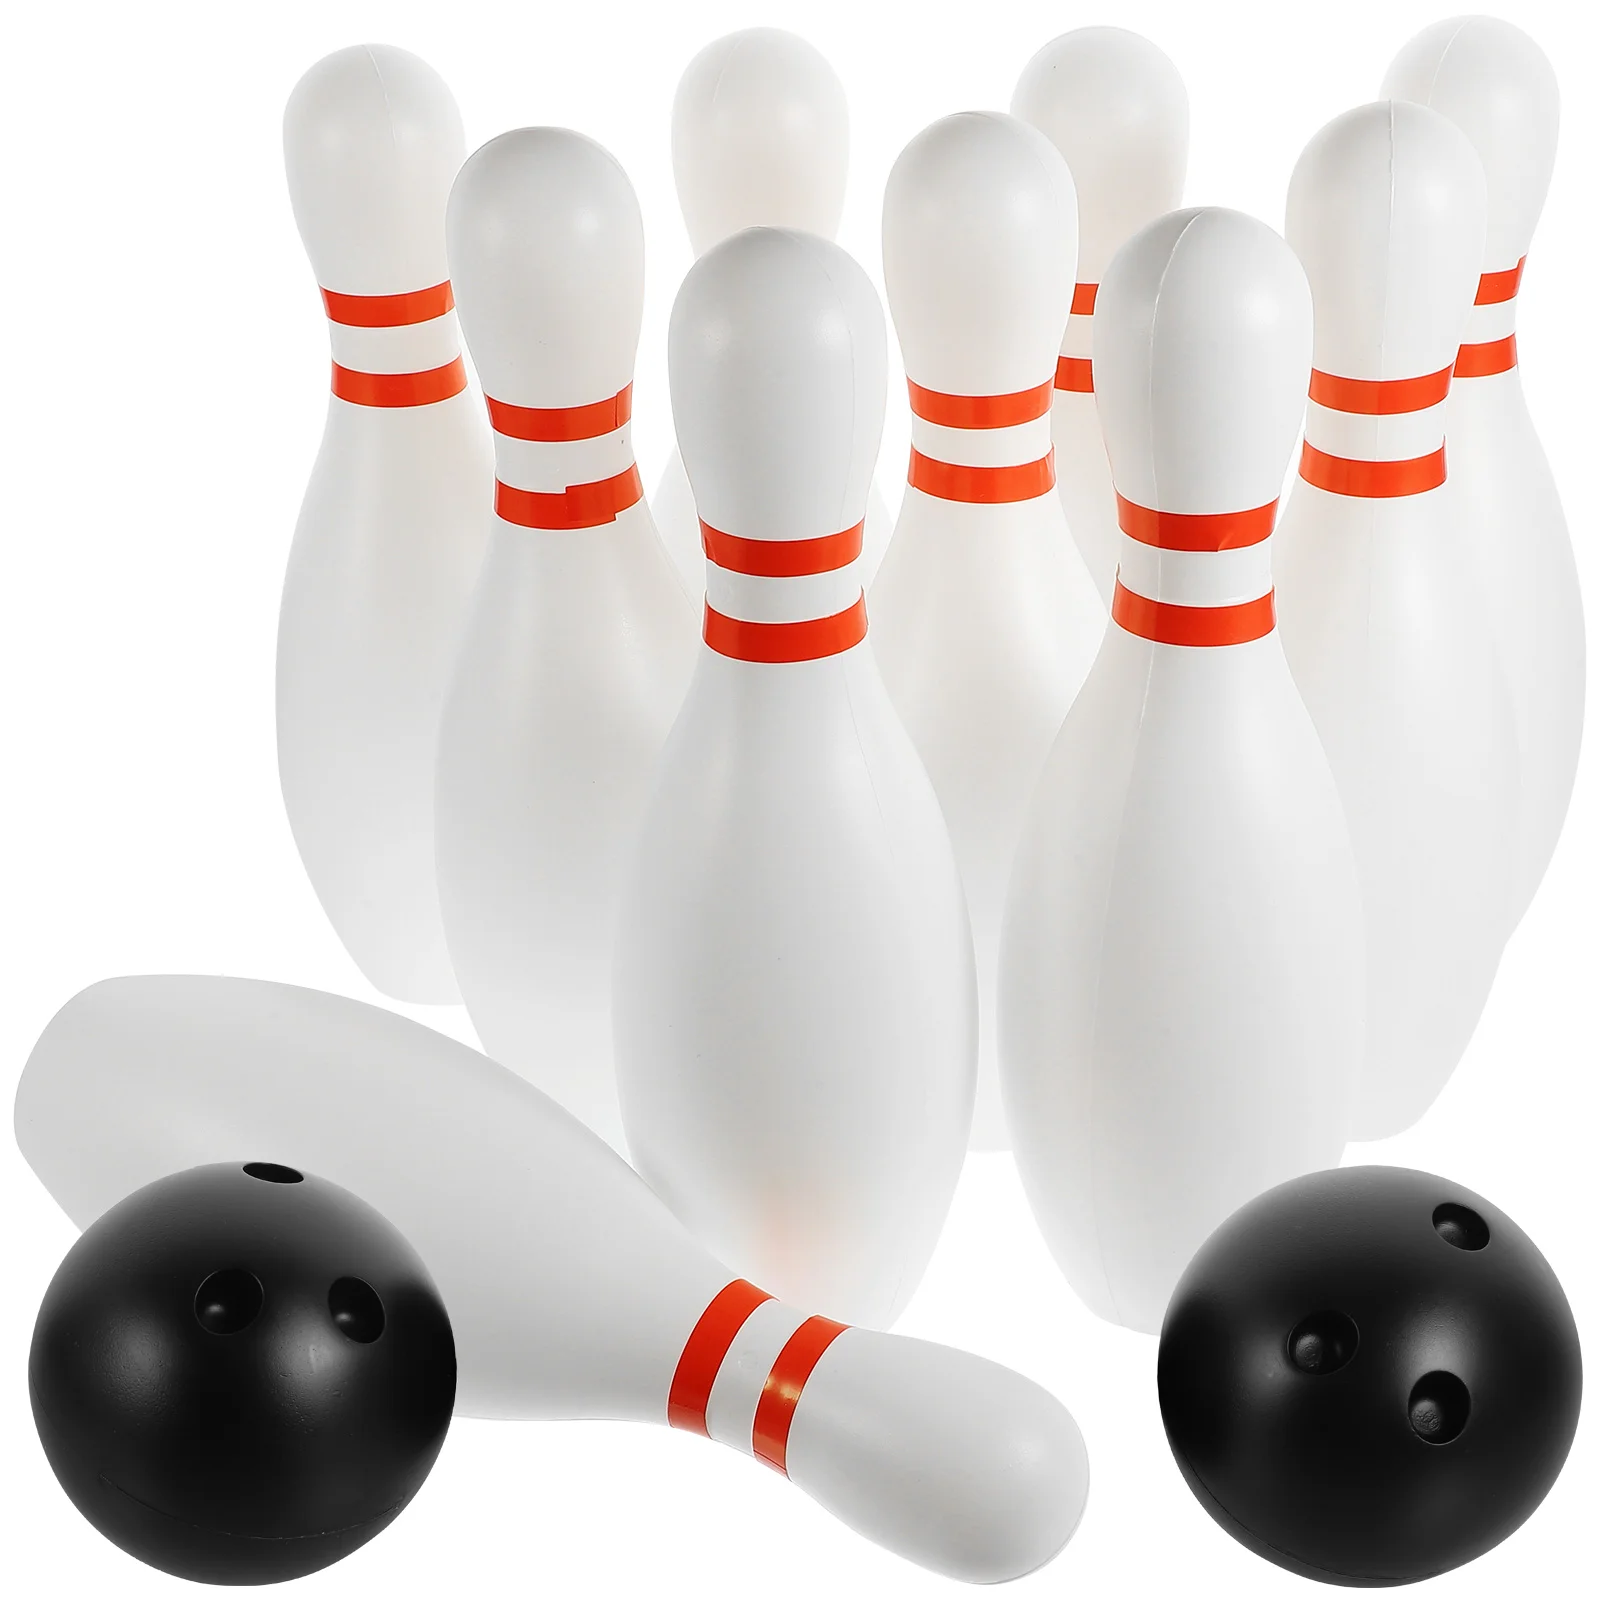 

Large Size Bowling Play Sets Indoor Outdoor Sports Bowling Games Toy for Kids(10pcs Bowling White+2pcs Balls Random Color)